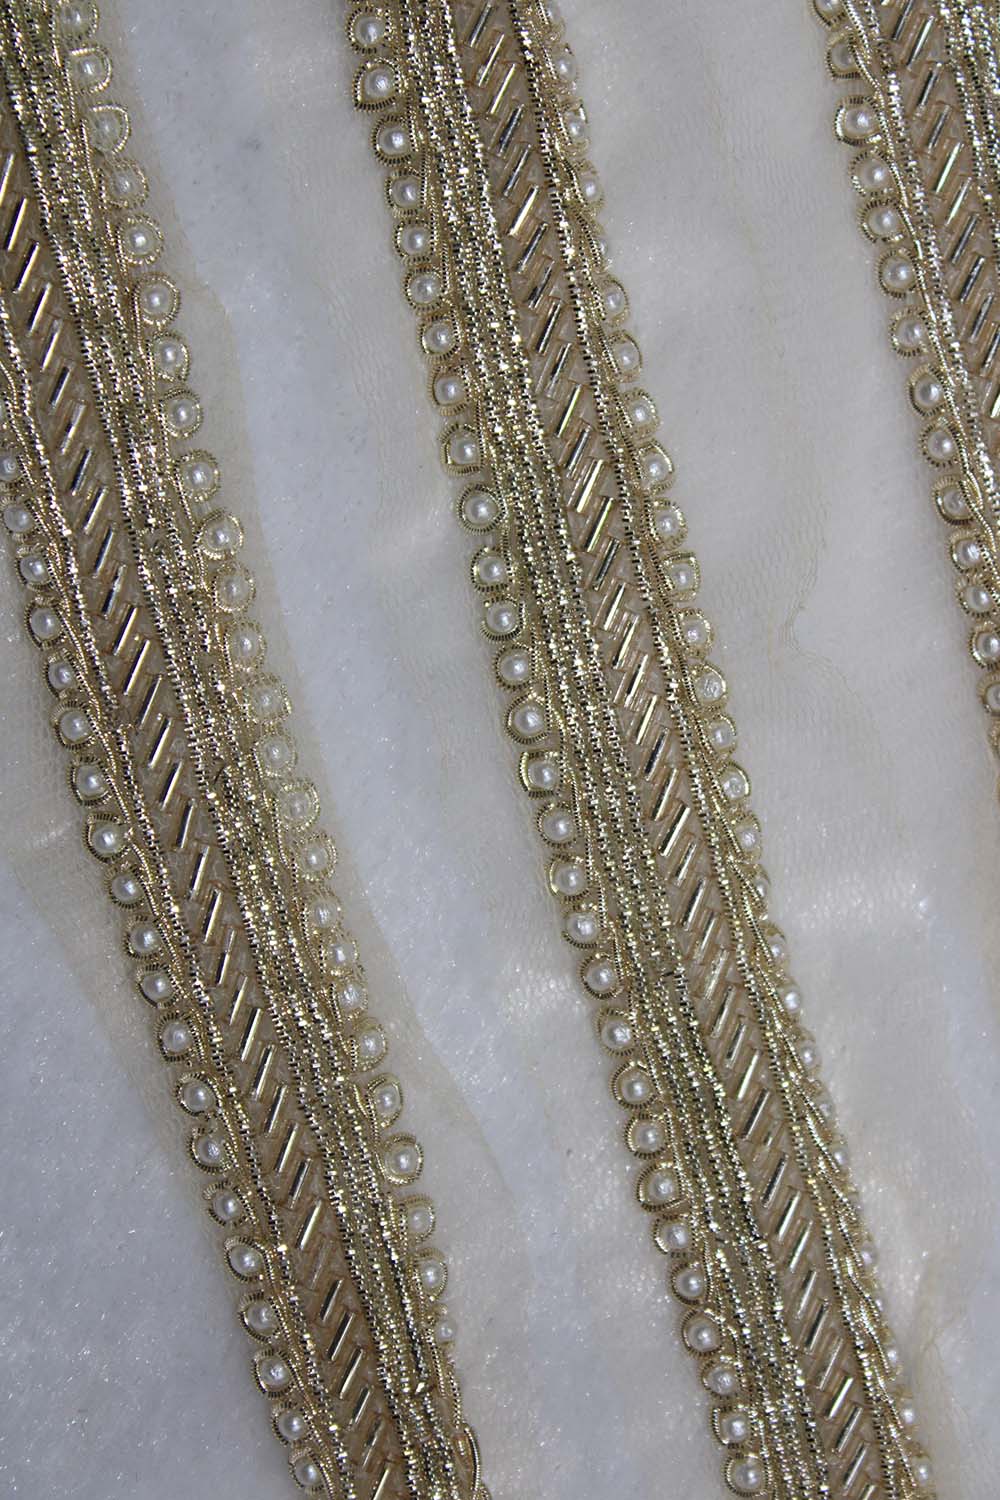 Exquisite Golden Beads And Pearl Work Handwork Lace: A Masterpiece of Embellishment ( Roll OF 9 Meter ) - Luxurion World